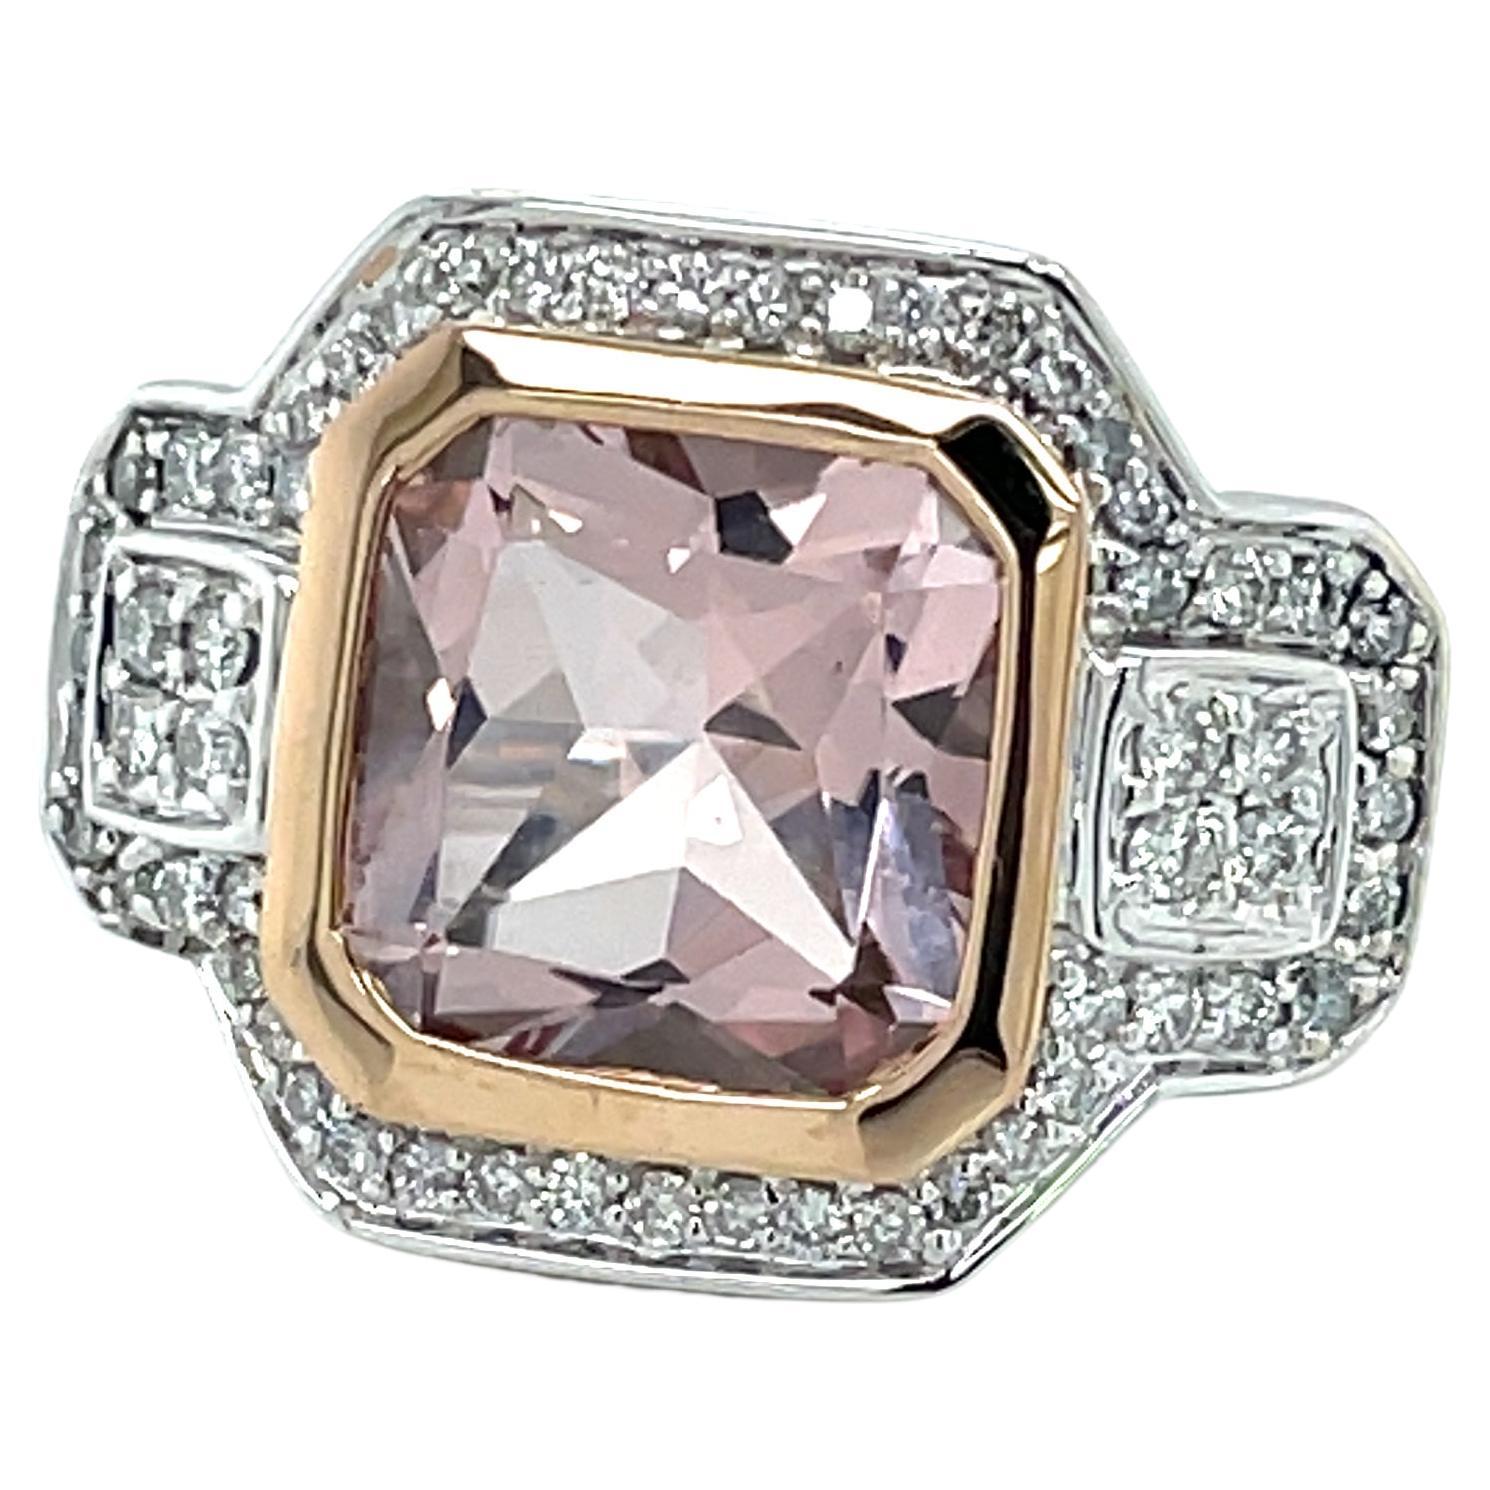 Express your mood wearing this serine violet 4.5 carat cushion cut Kunzite framed with a complementing 18 karat yellow gold bezel that makes the gemstone color pop. Surrounding the 10.8 x 10.8mm center stone are over one half carats of full cut